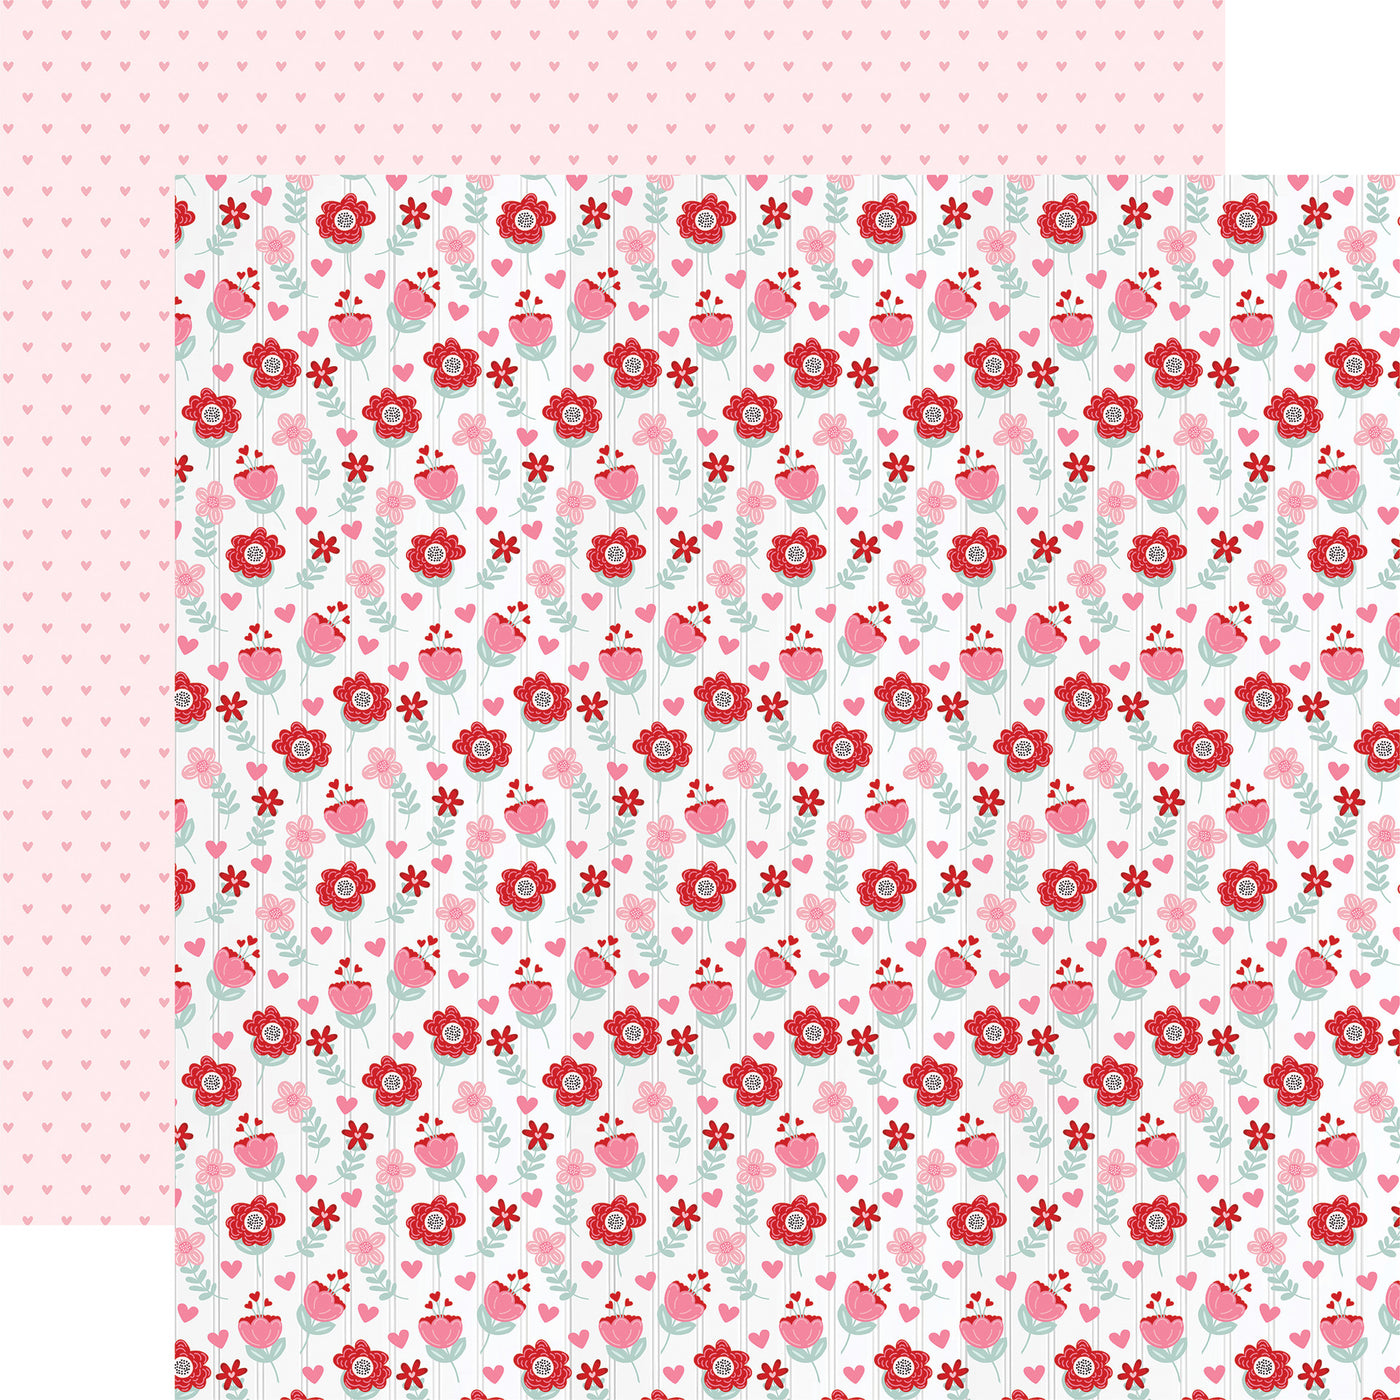 12x12 double-sided sheet. (Side A - sweet, red, pink, and teal floral on a white background; Side B - rows of dark pink hearts on a light pink background) Archival quality, acid-free. 